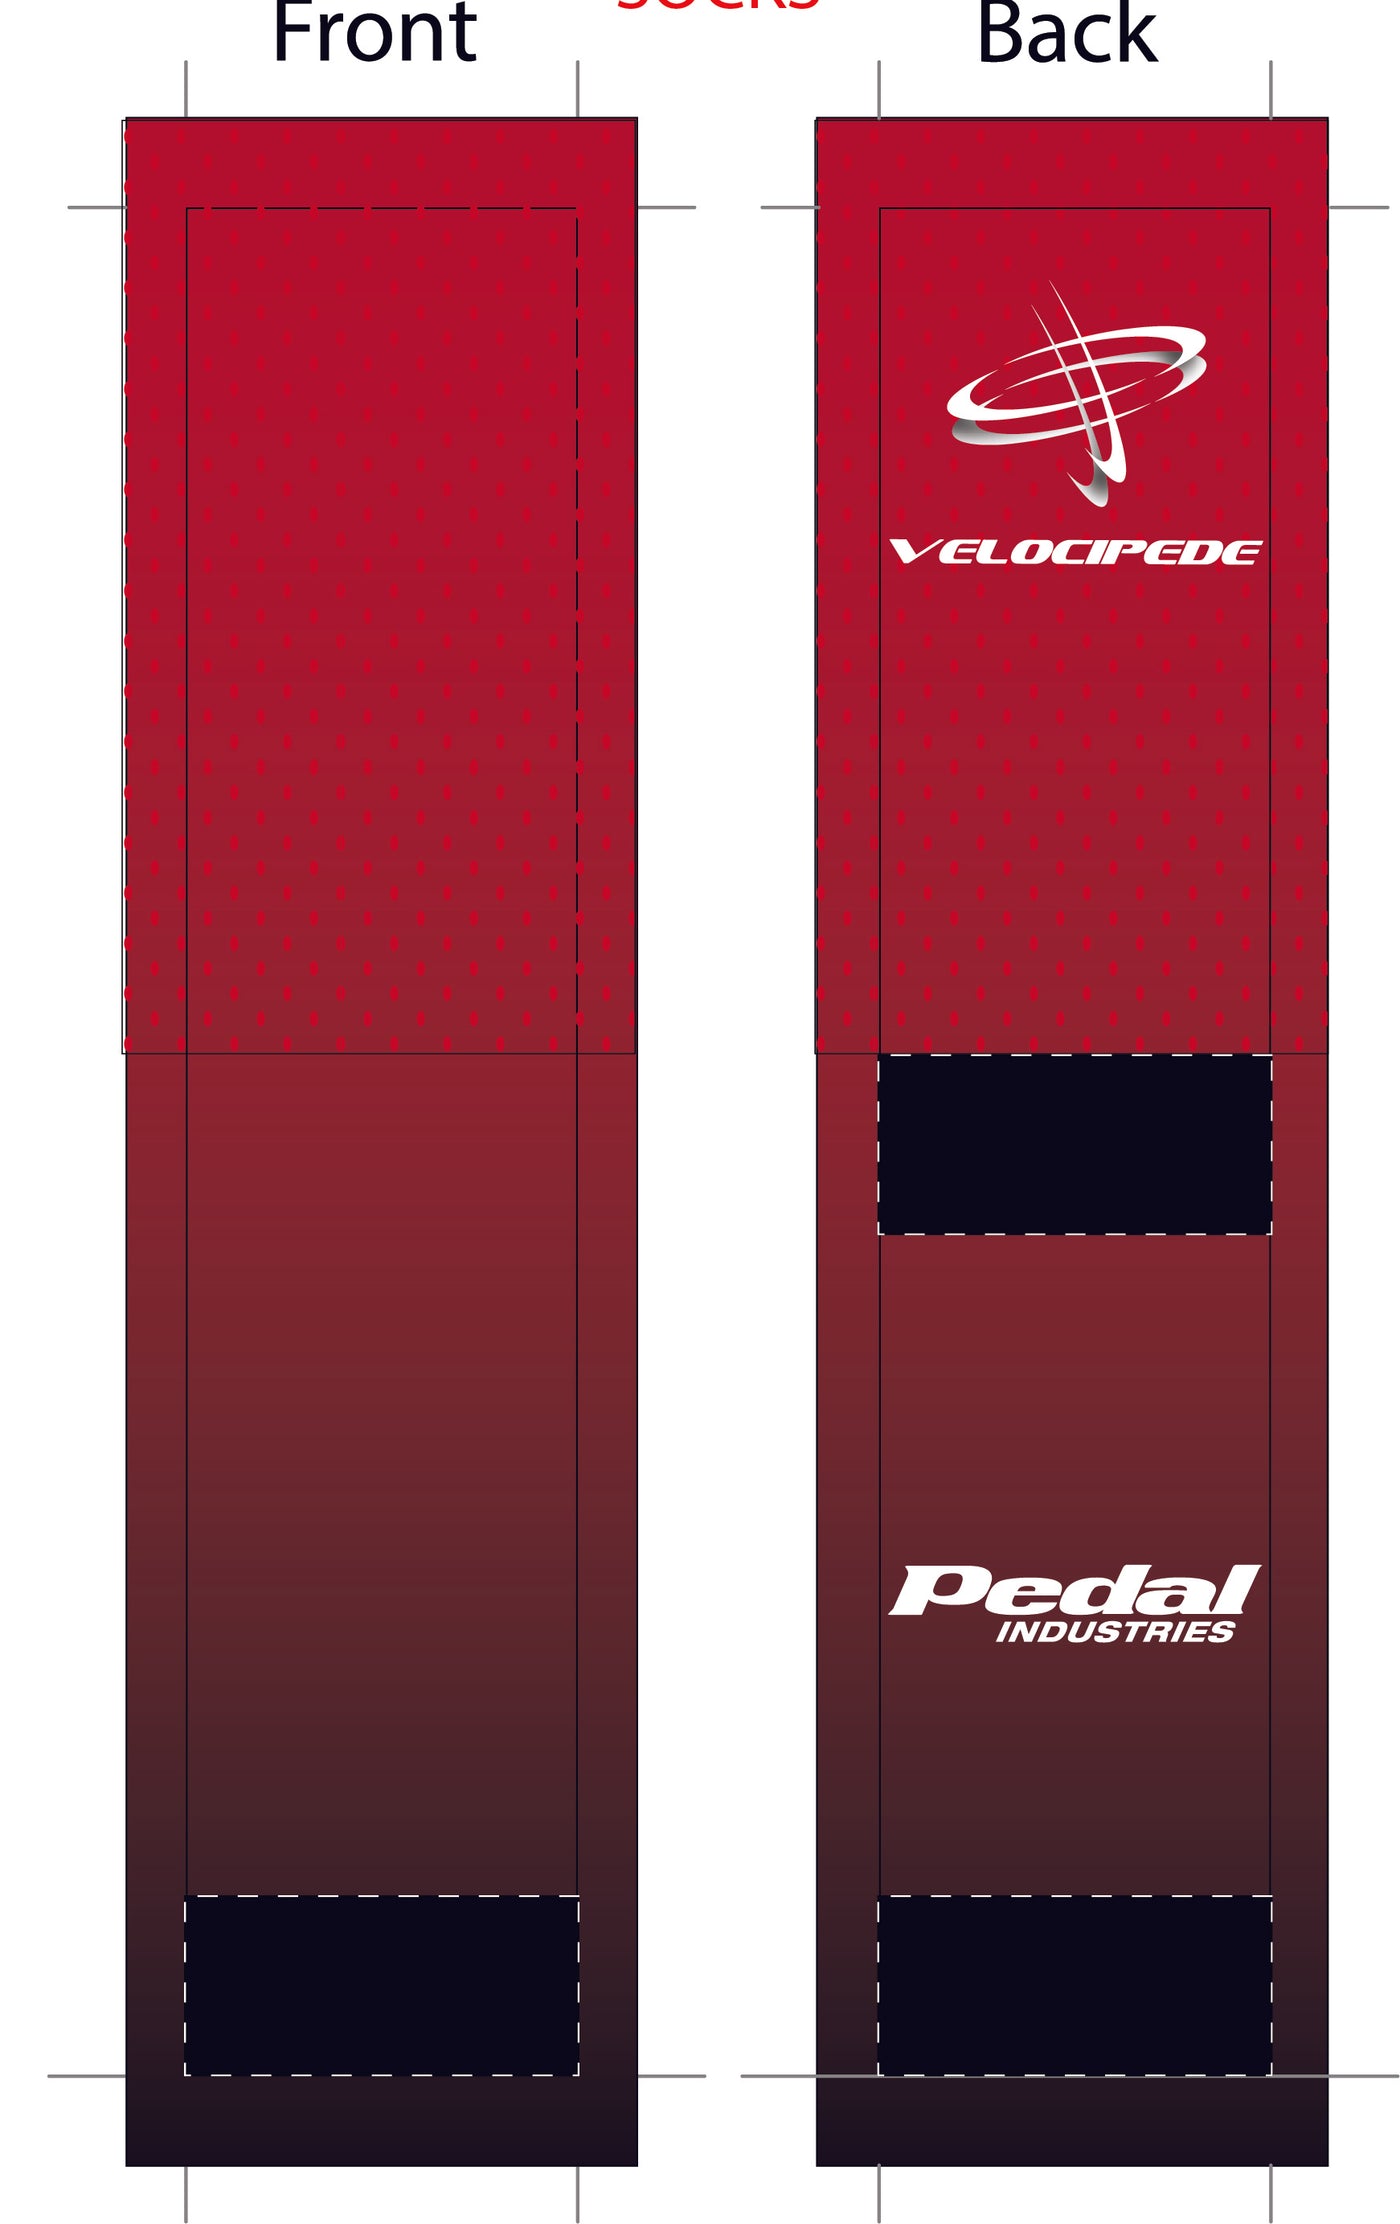 VELOCIPEDE RED SUBLIMATED SOCK - SHIPS IN ABOUT 4 WEEKS